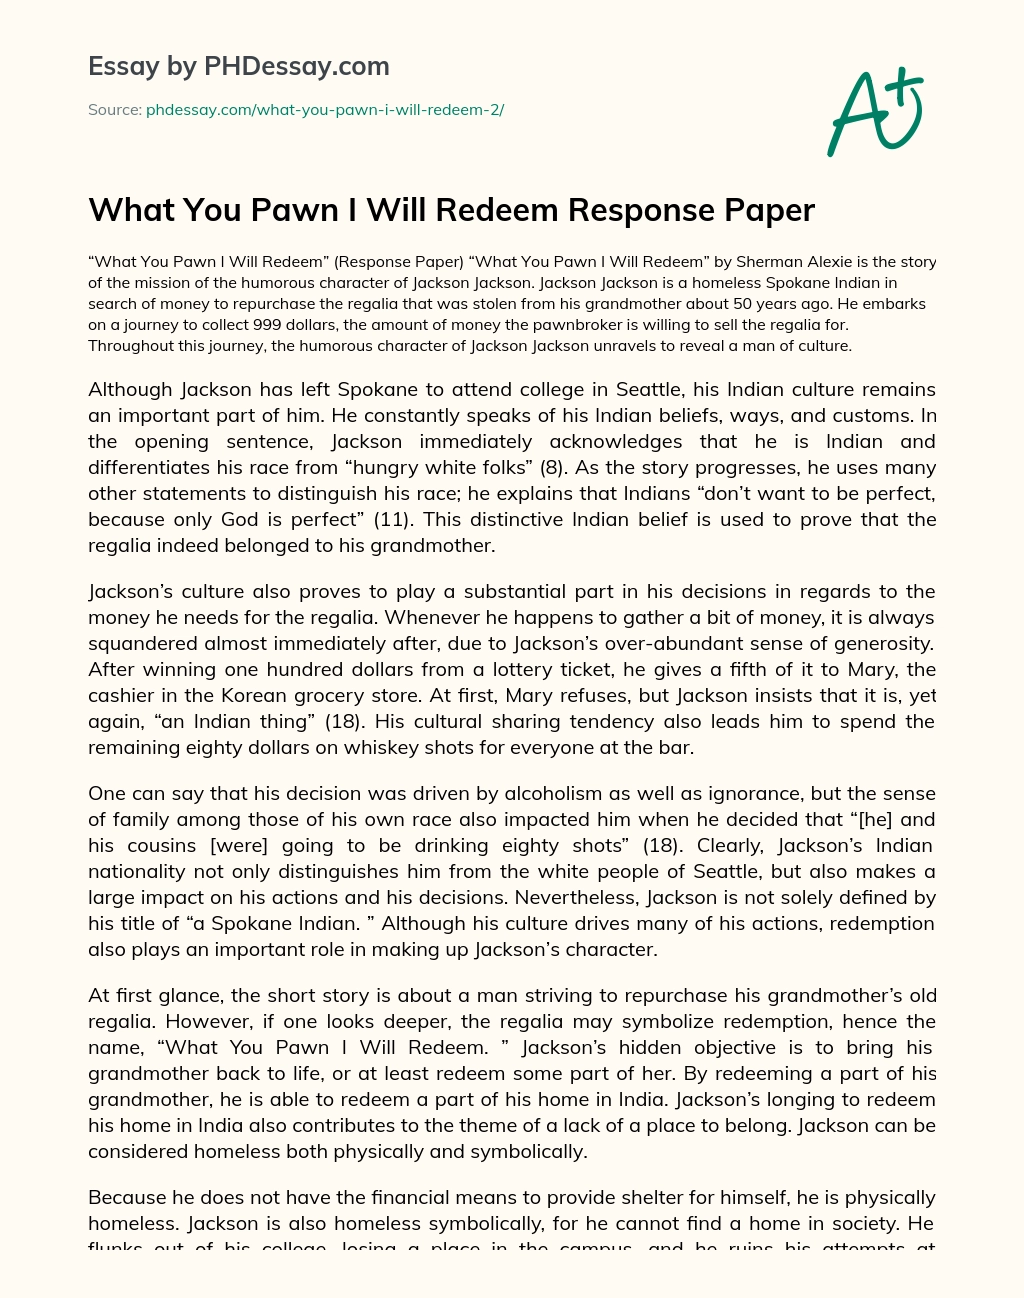 What You Pawn I Will Redeem Response Paper essay